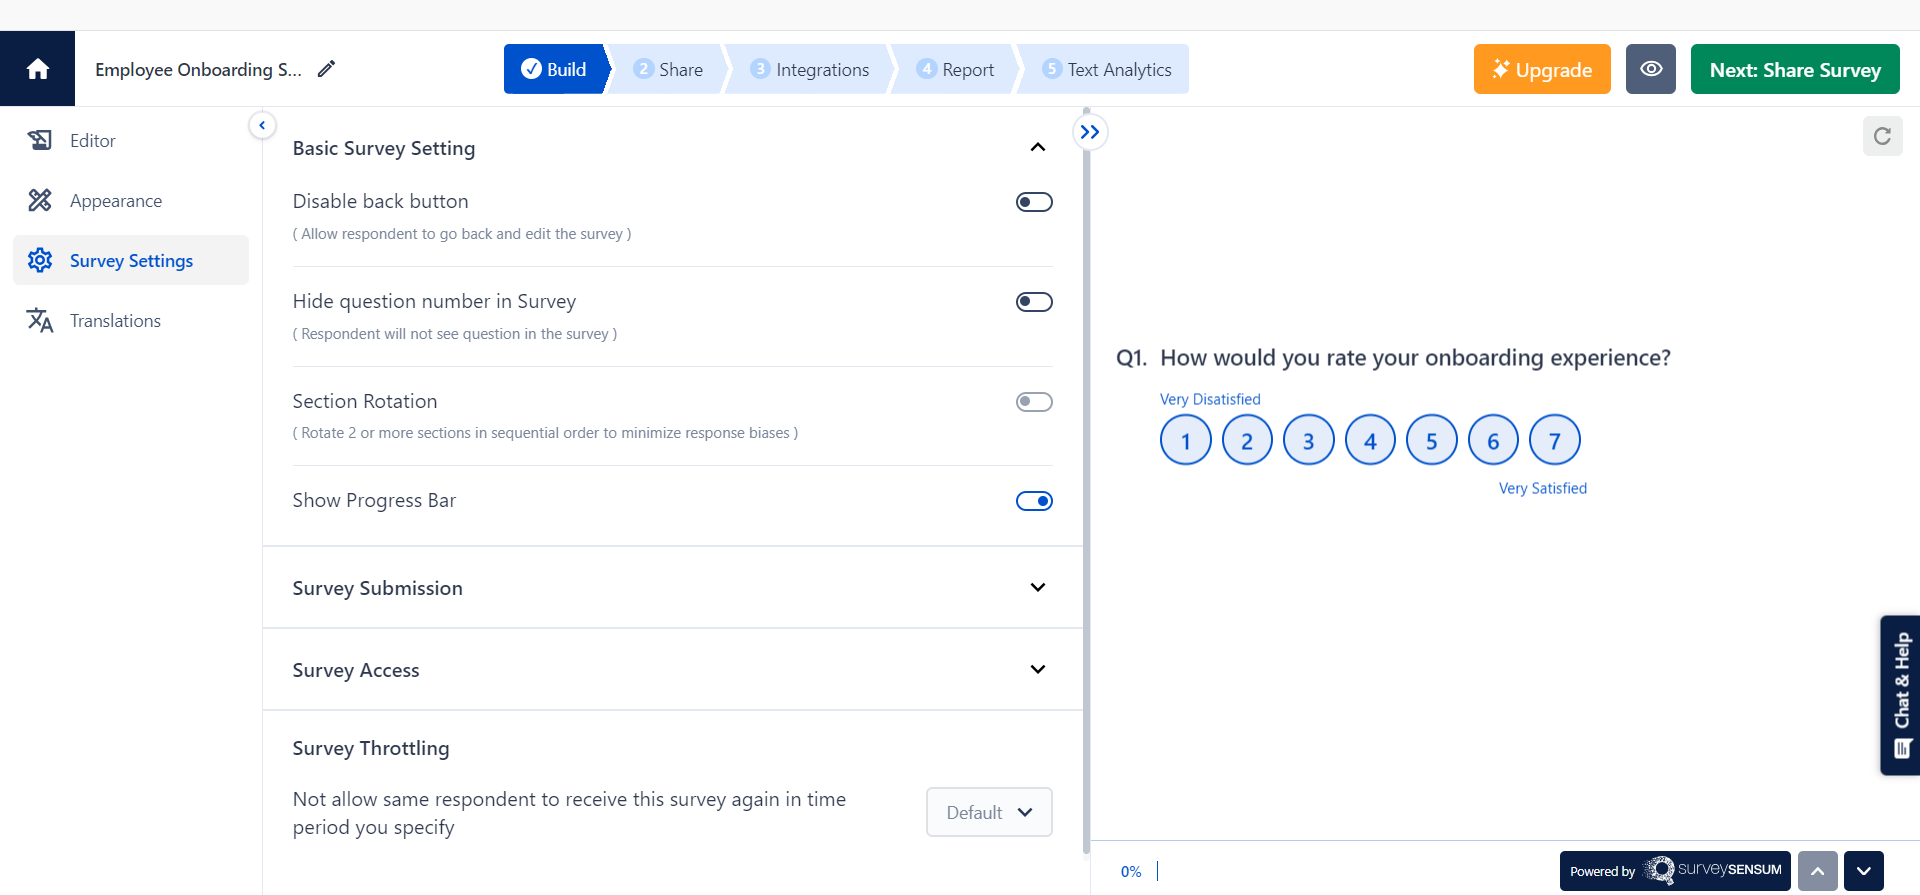  This is the image of the survey customization options offered by SurveySensum 